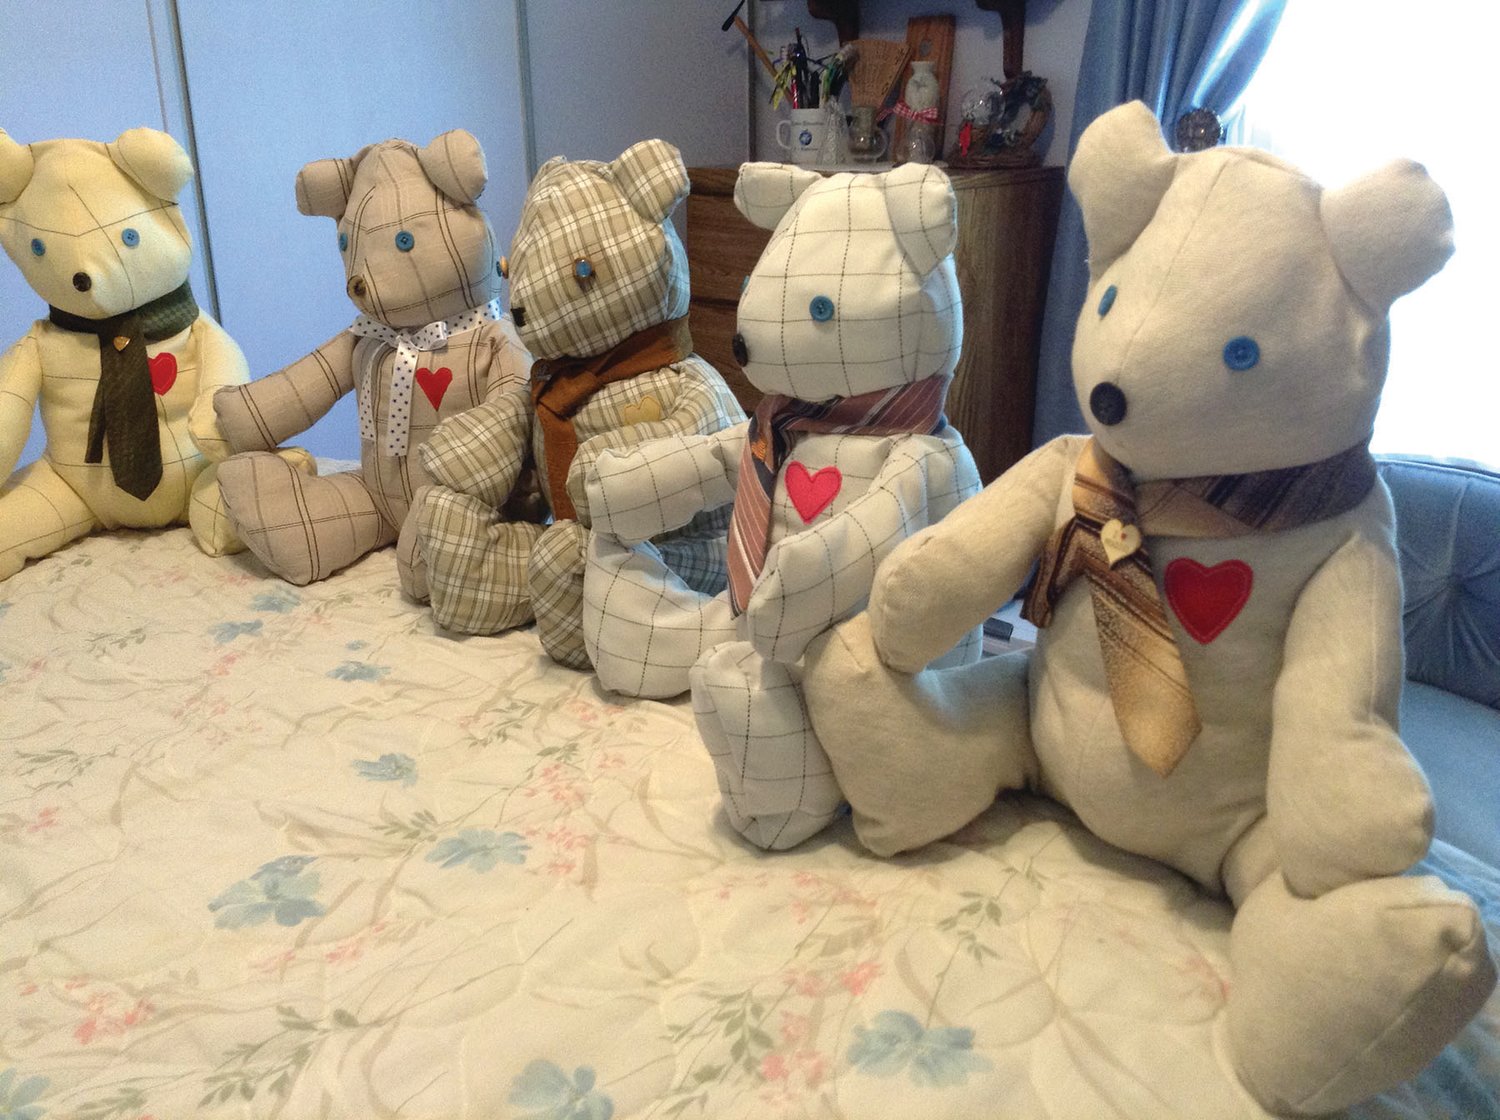 Making these teddy bears was suggested by Marlene Burns’s granddaughter.